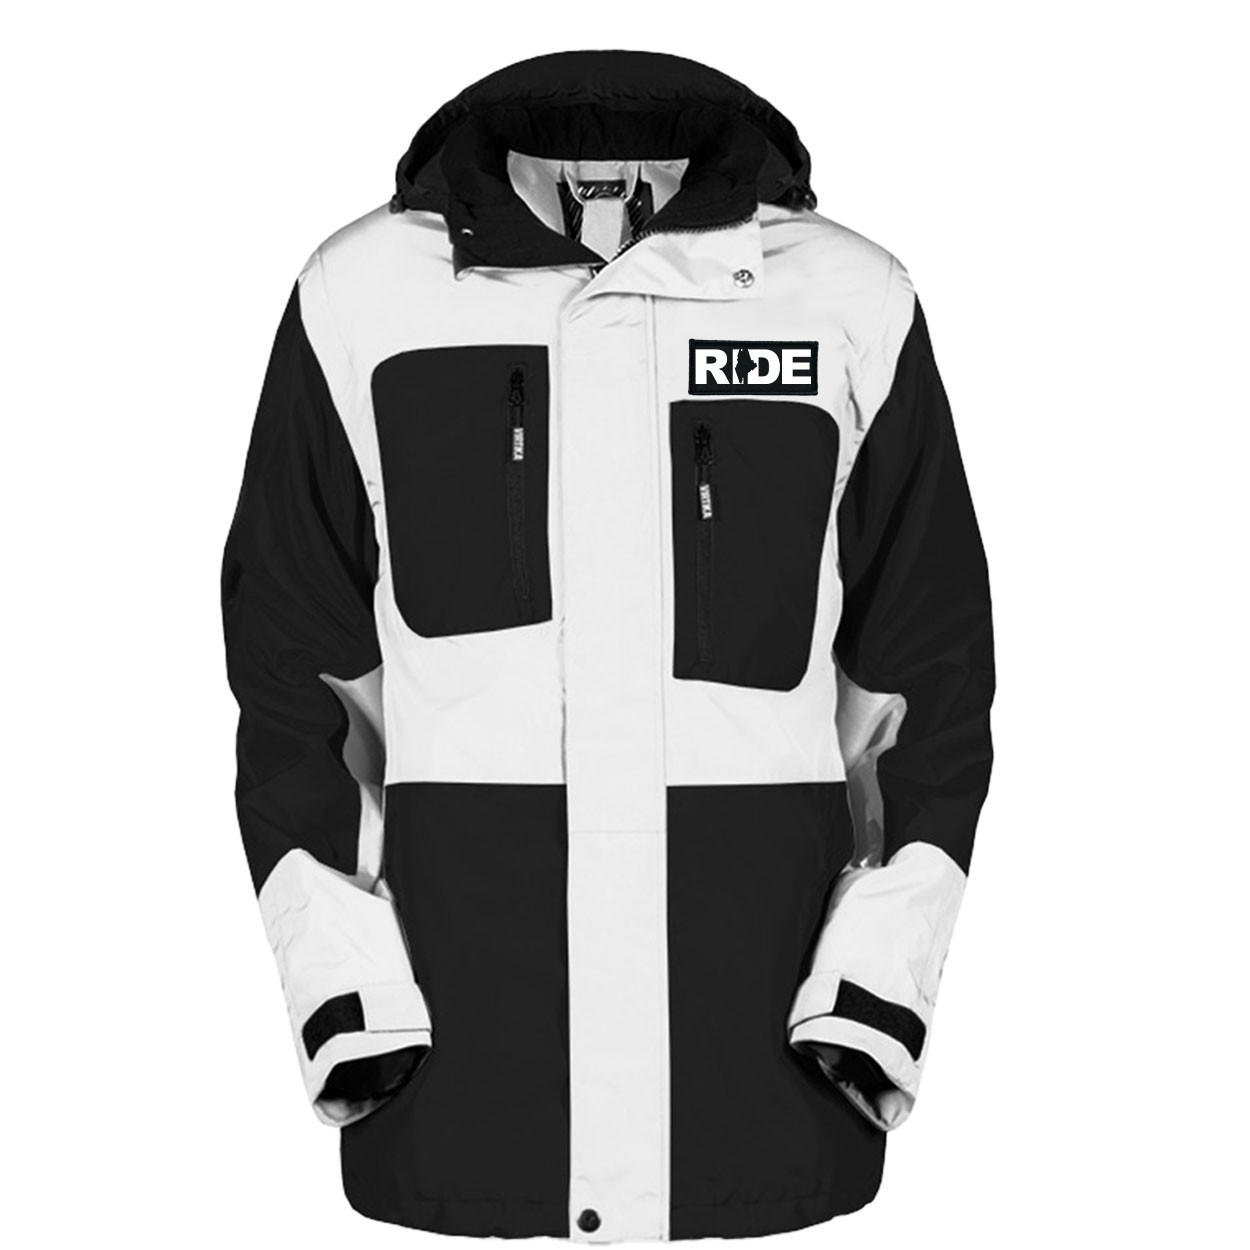 Ride Maine Classic Woven Patch Pro Snowboard Jacket (Black/White)